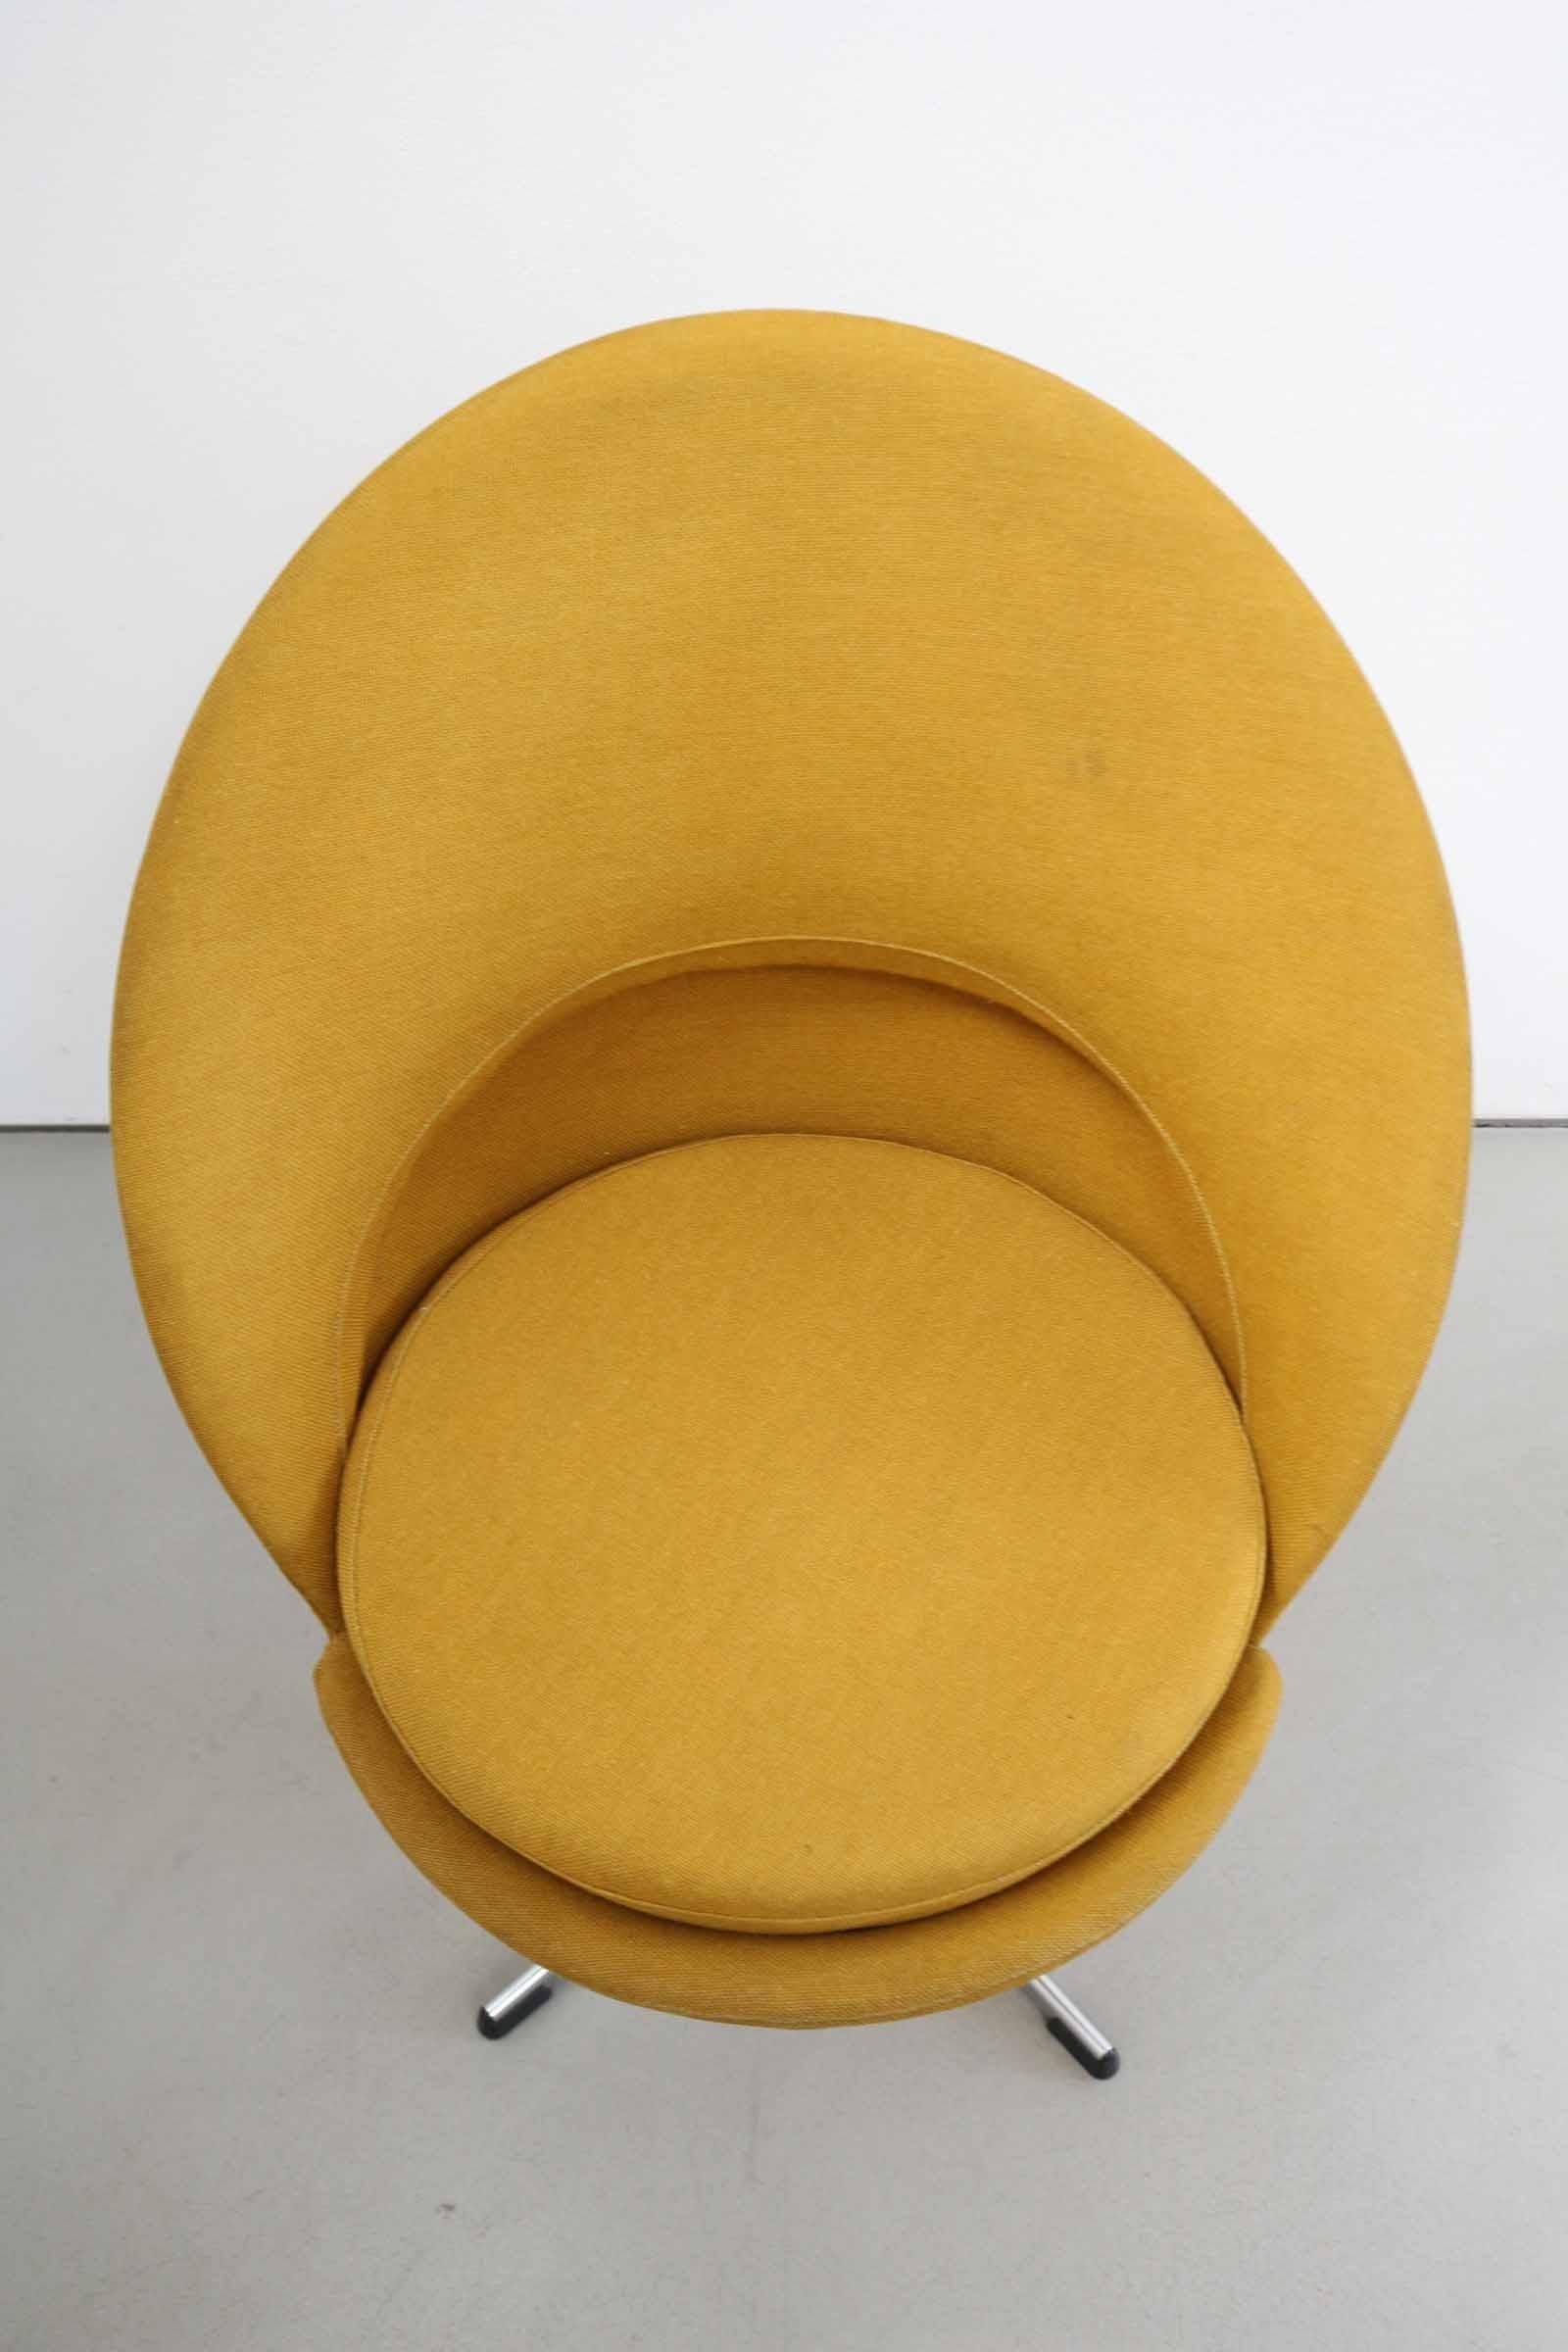 Verner Panton Cone Chair in Original Fabric, Denmark, 1960s In Good Condition For Sale In Berlin, BE